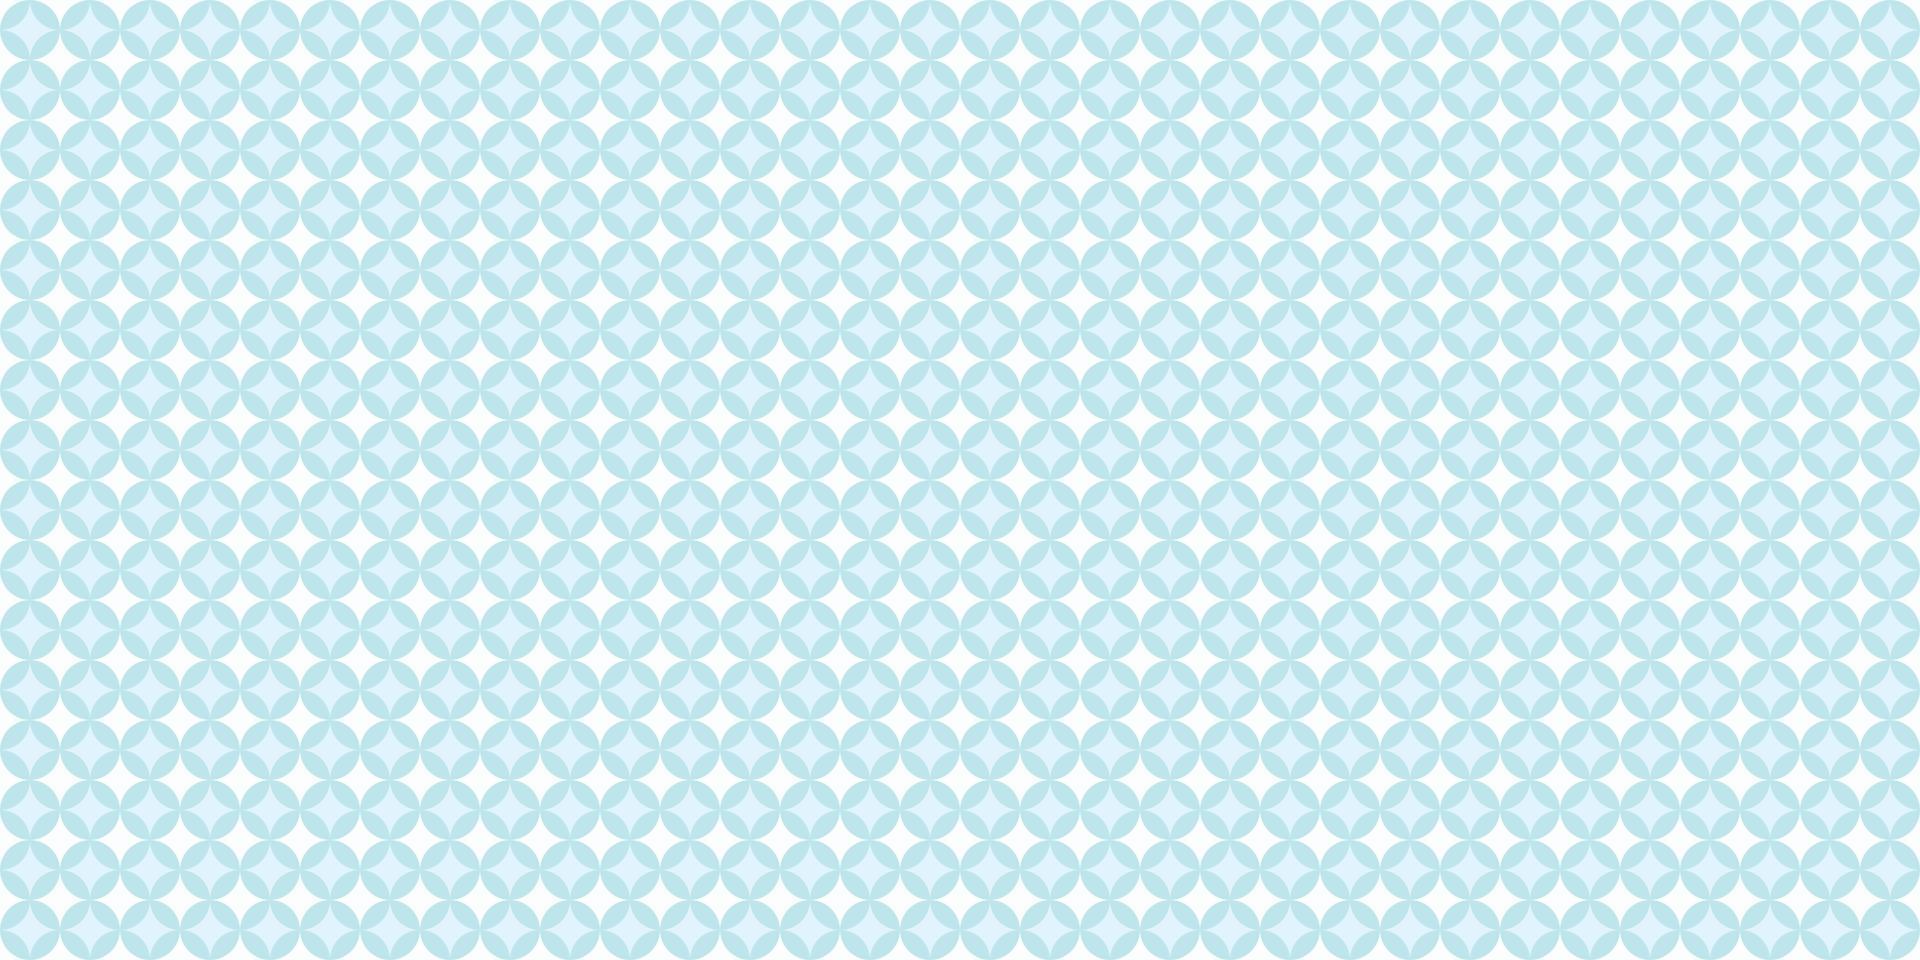 Blue geometric seamless repeat pattern background vector